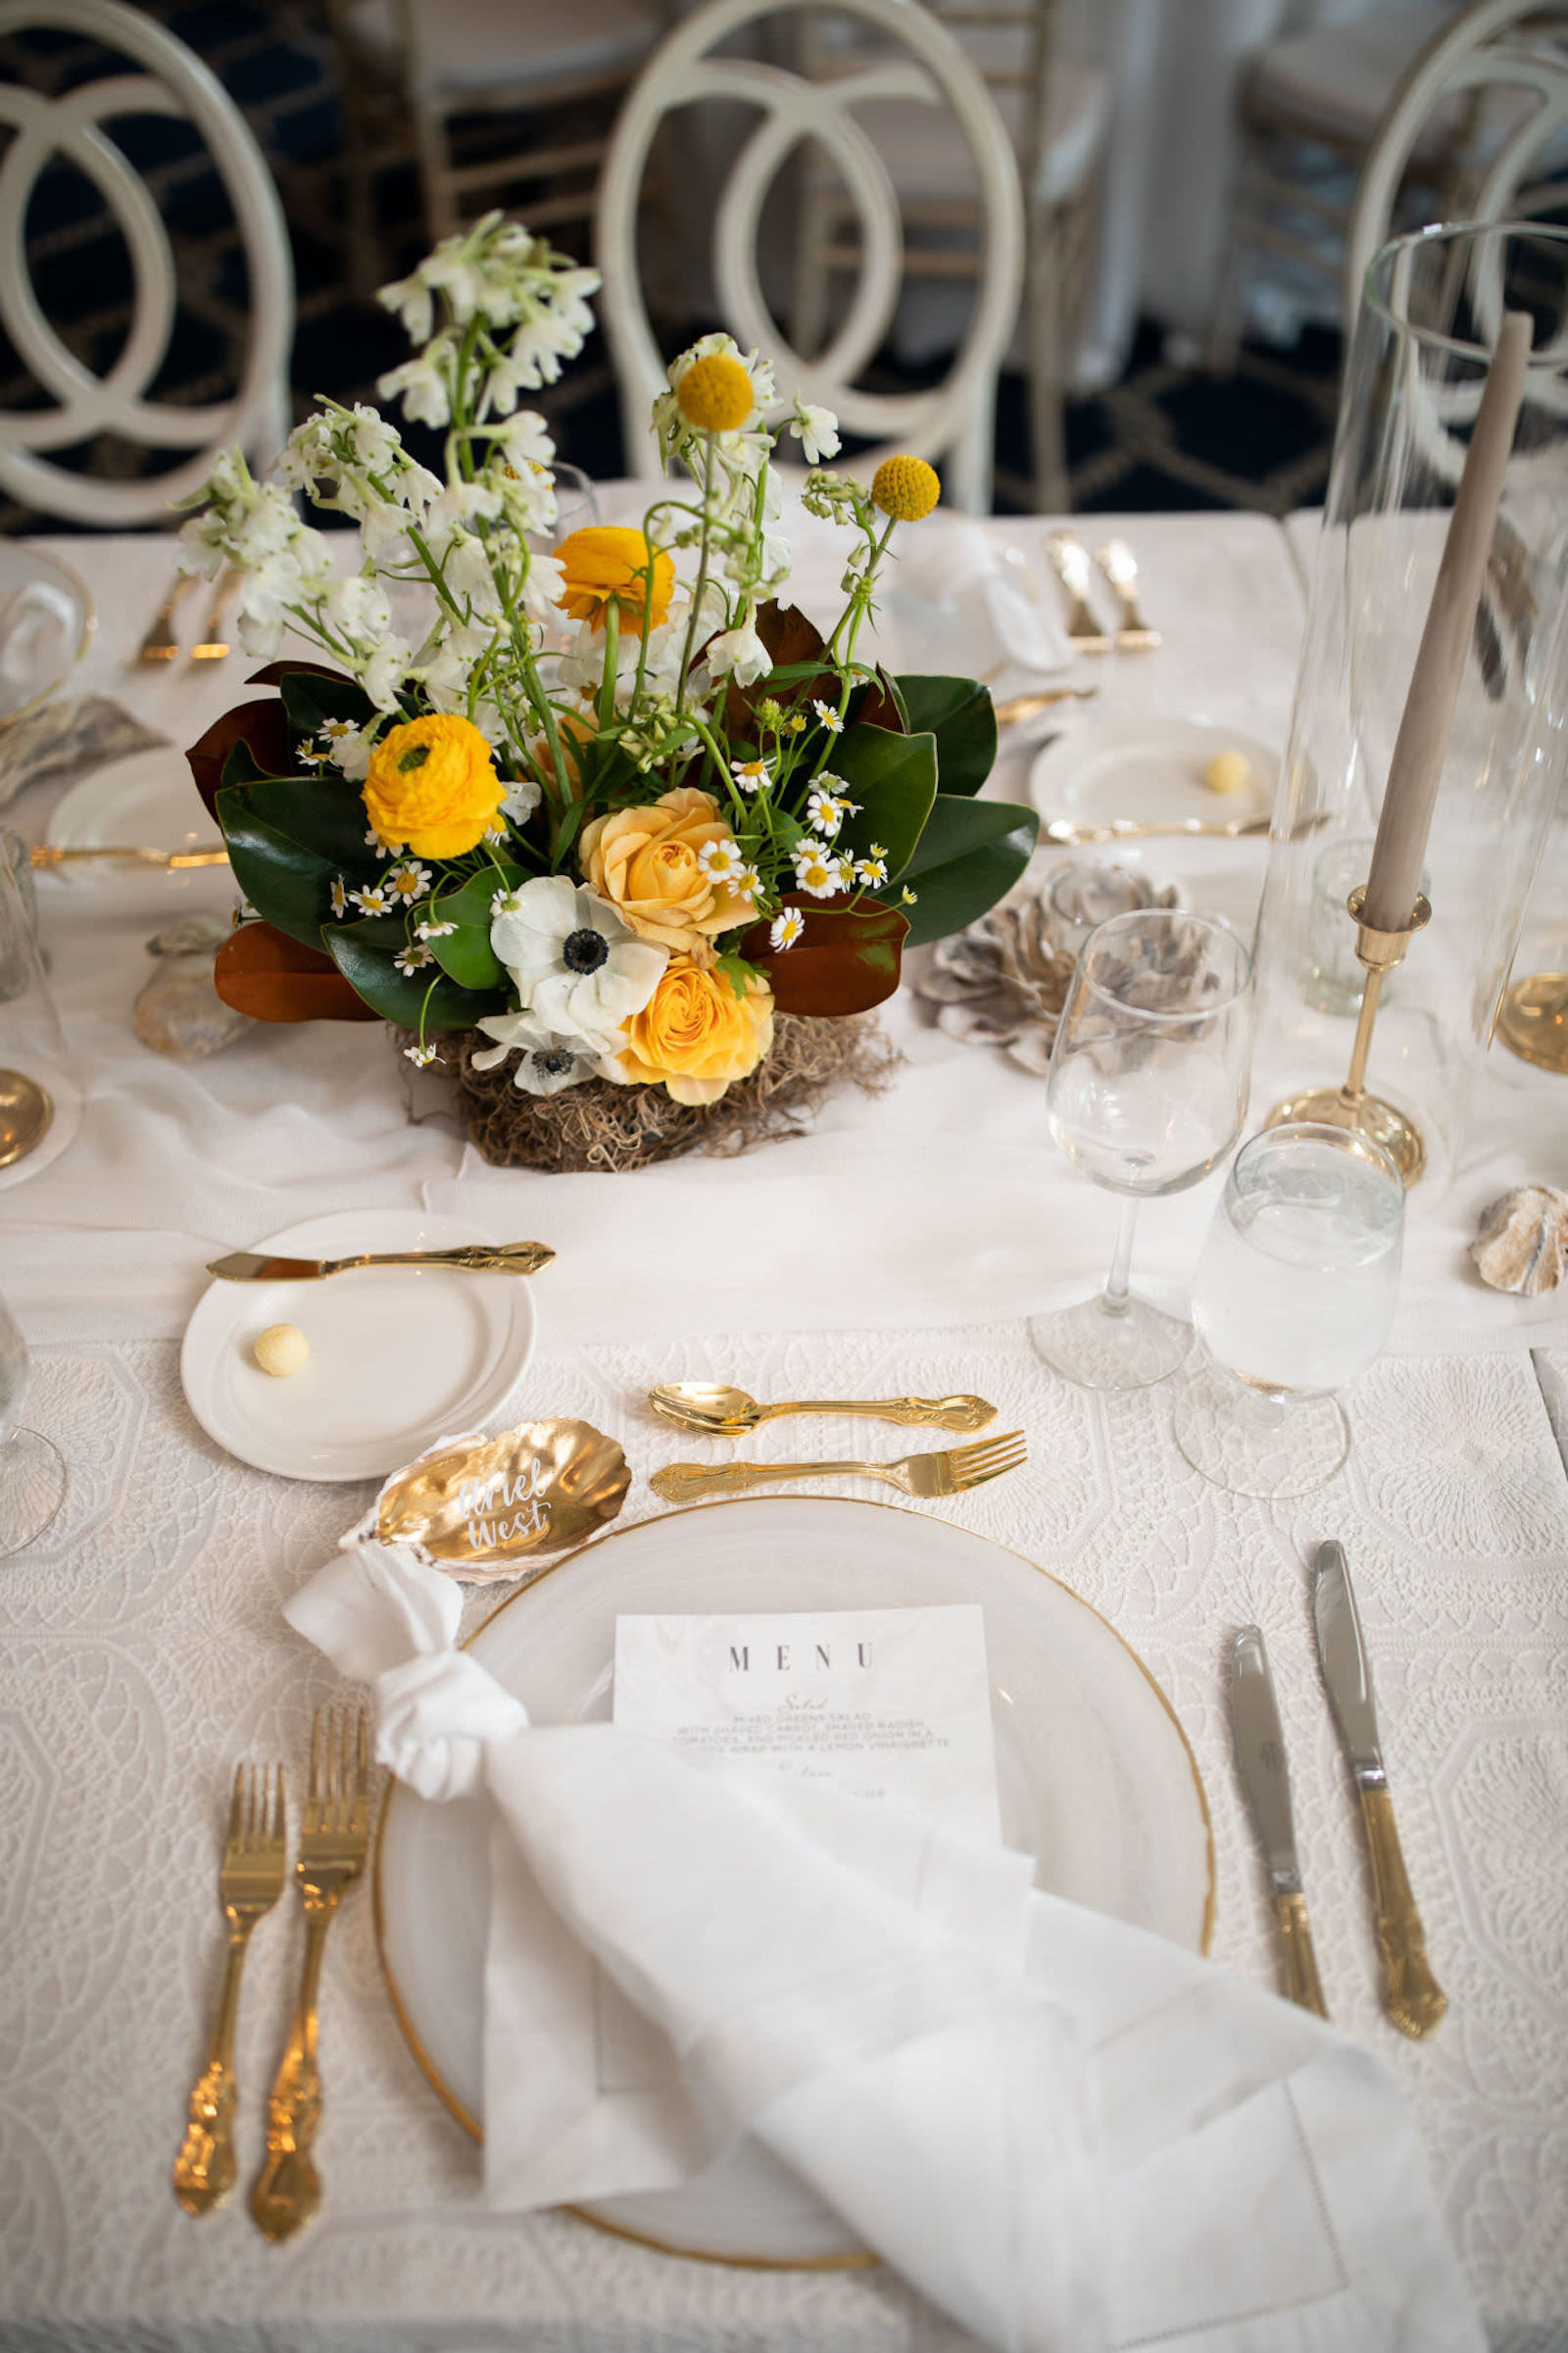 Elegant Nautical Wedding Reception Decor, Gold Rimmed Charger, White Linens, Gold Flatware, Low Yellow, White and Greenery Floral Centerpiece | Tampa Bay Wedding Planner Parties A'la Carte